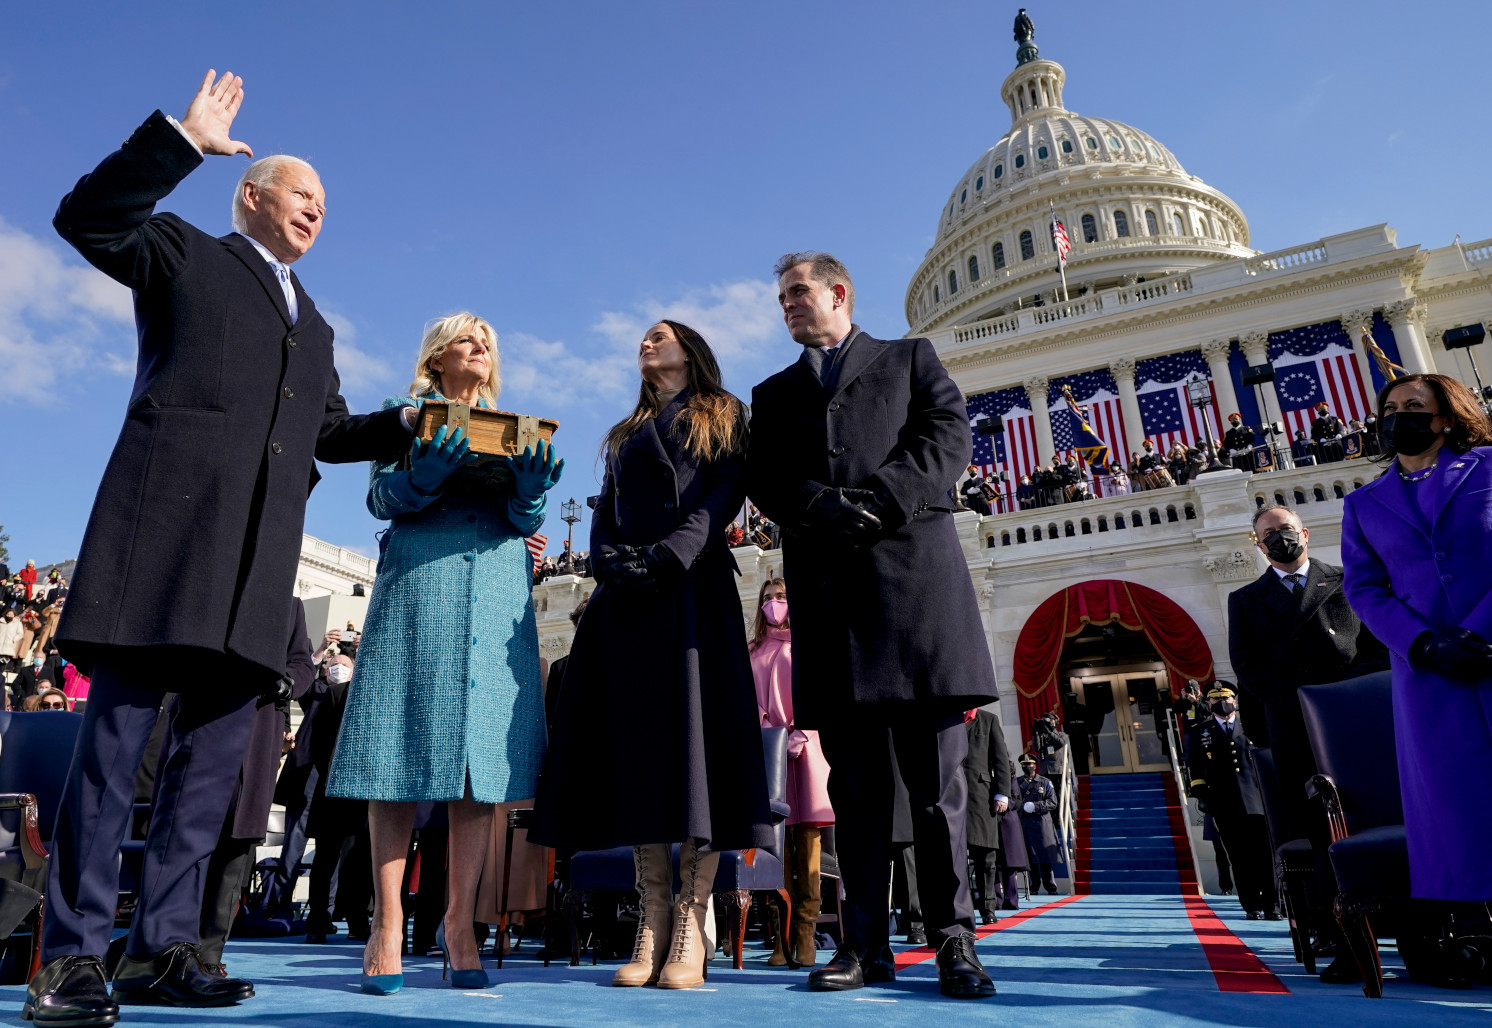 Pres. Biden's Challenges - Analysis From Journalists E.R. Shipp, Julie Byckowicz